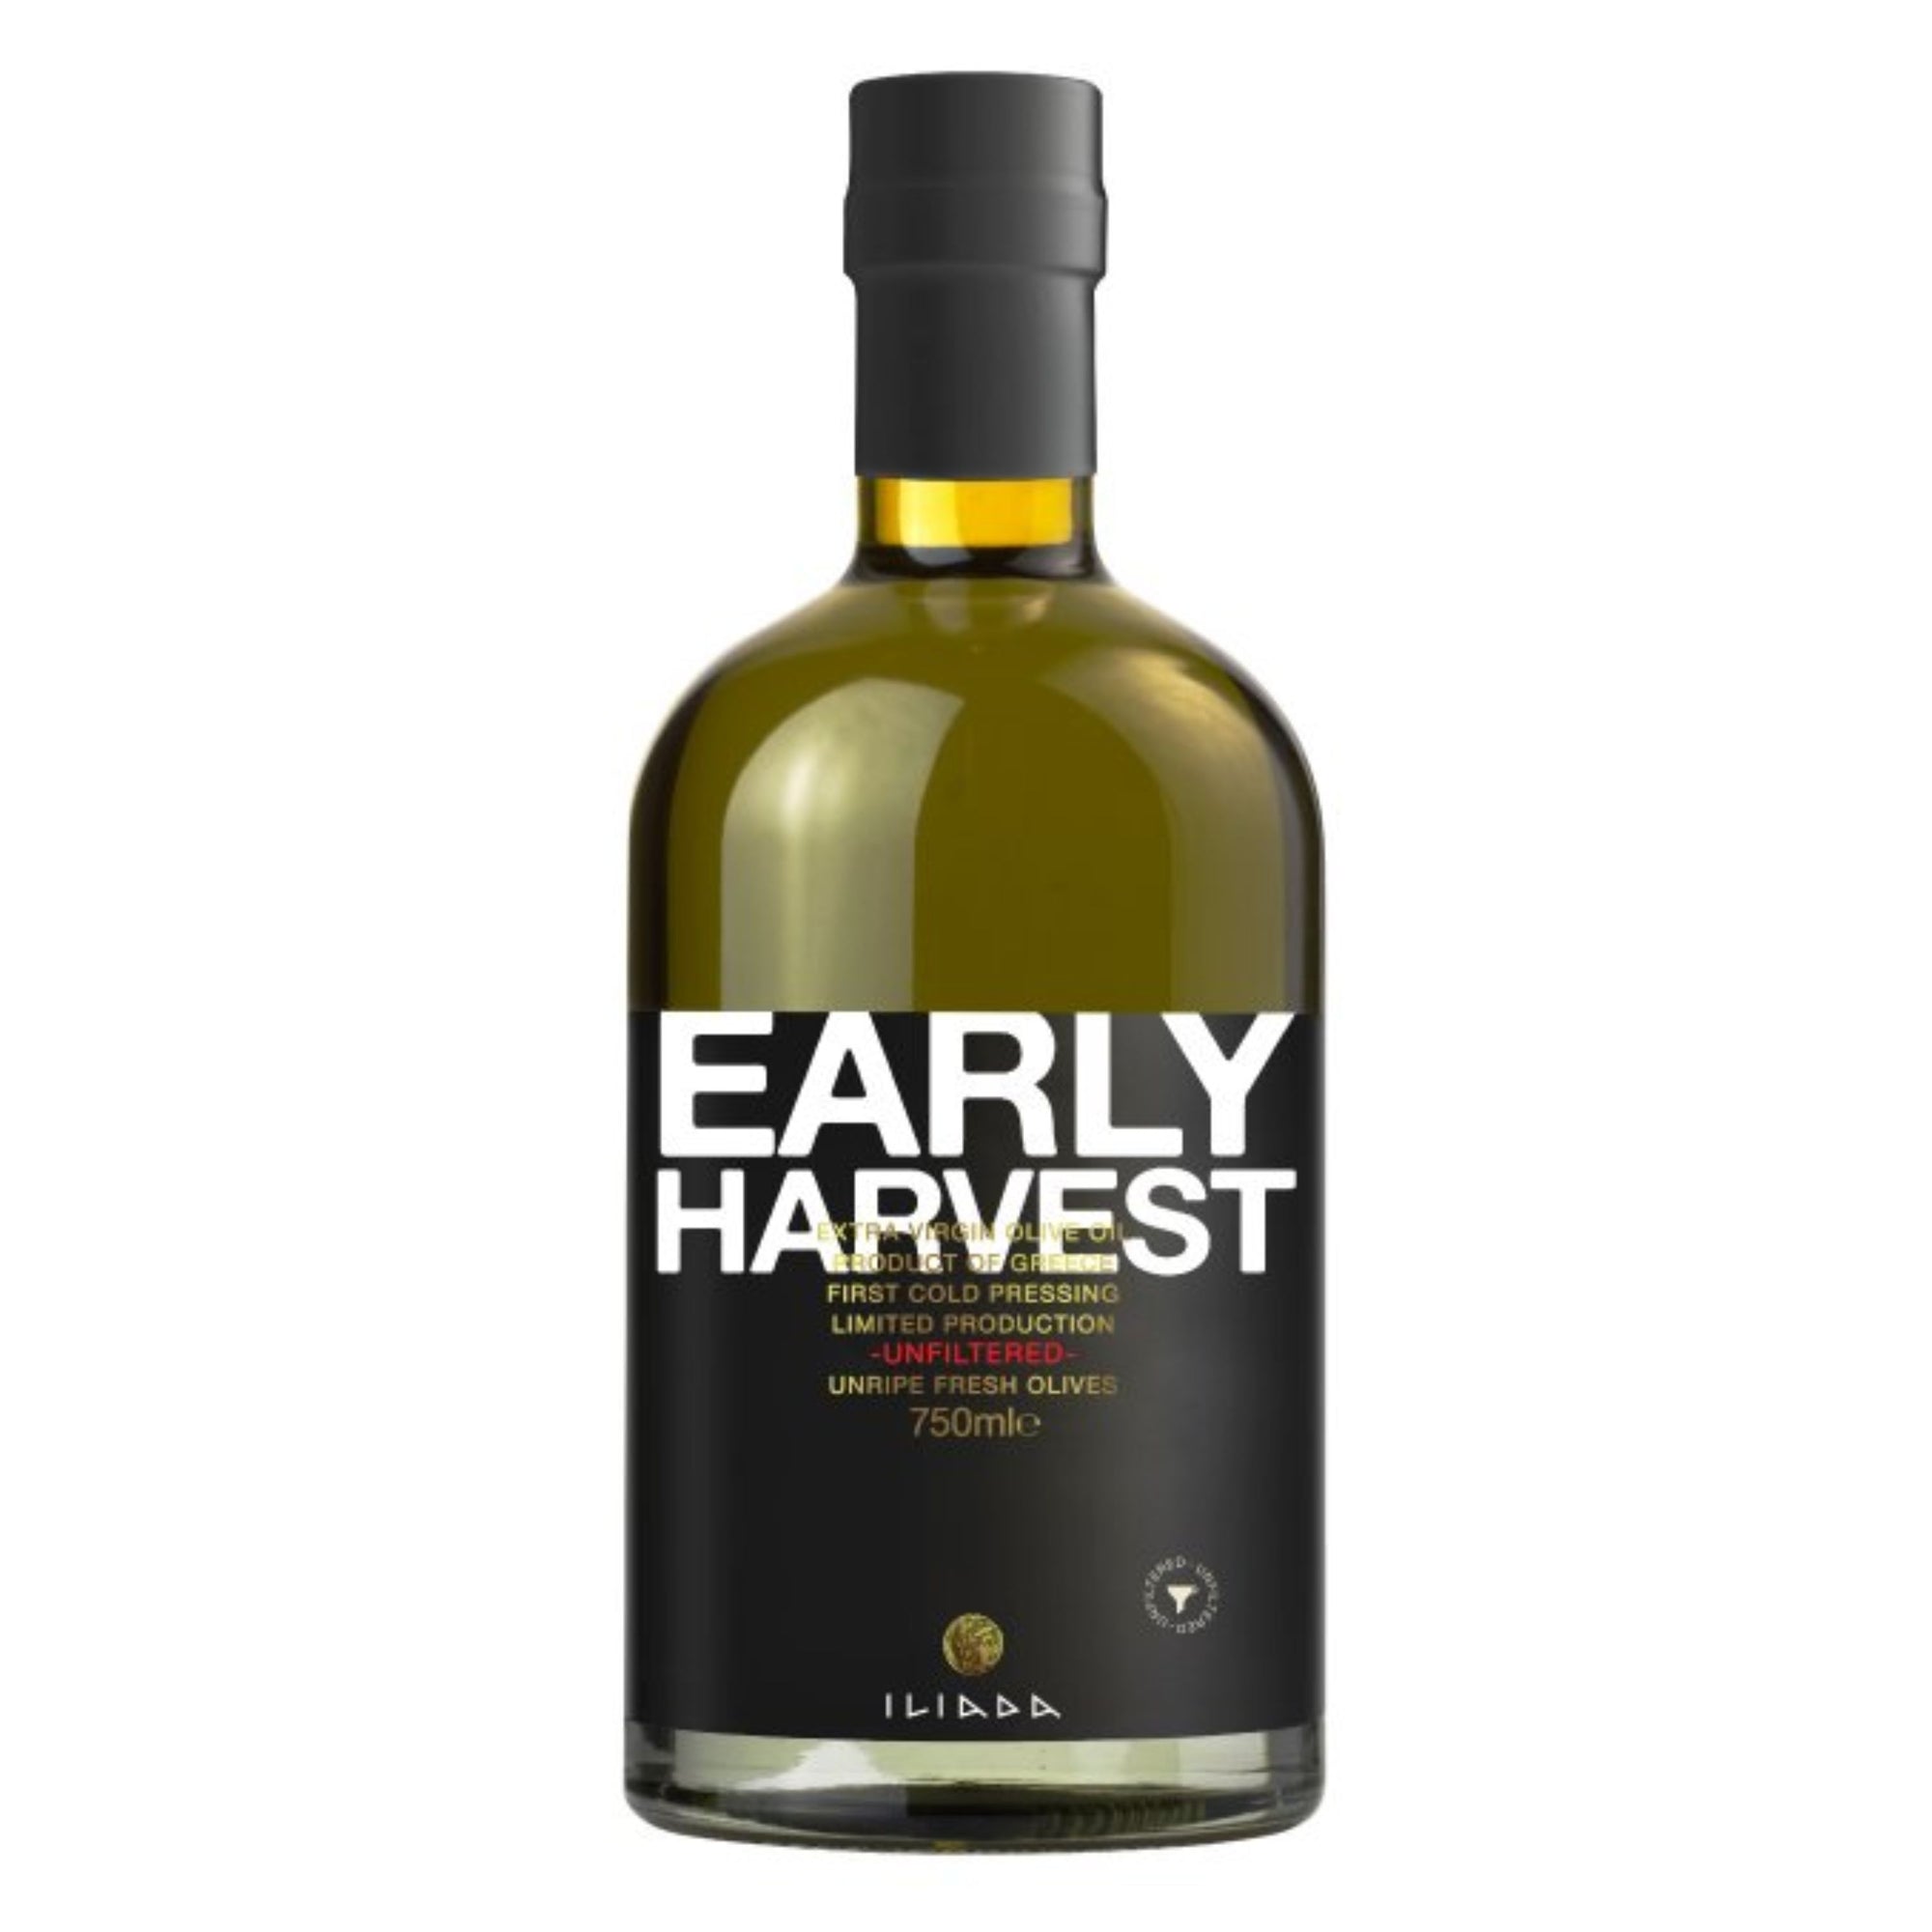 Extra Virgin Olive Oil Early Harvest Unfiltered 'Iliada' 750ml